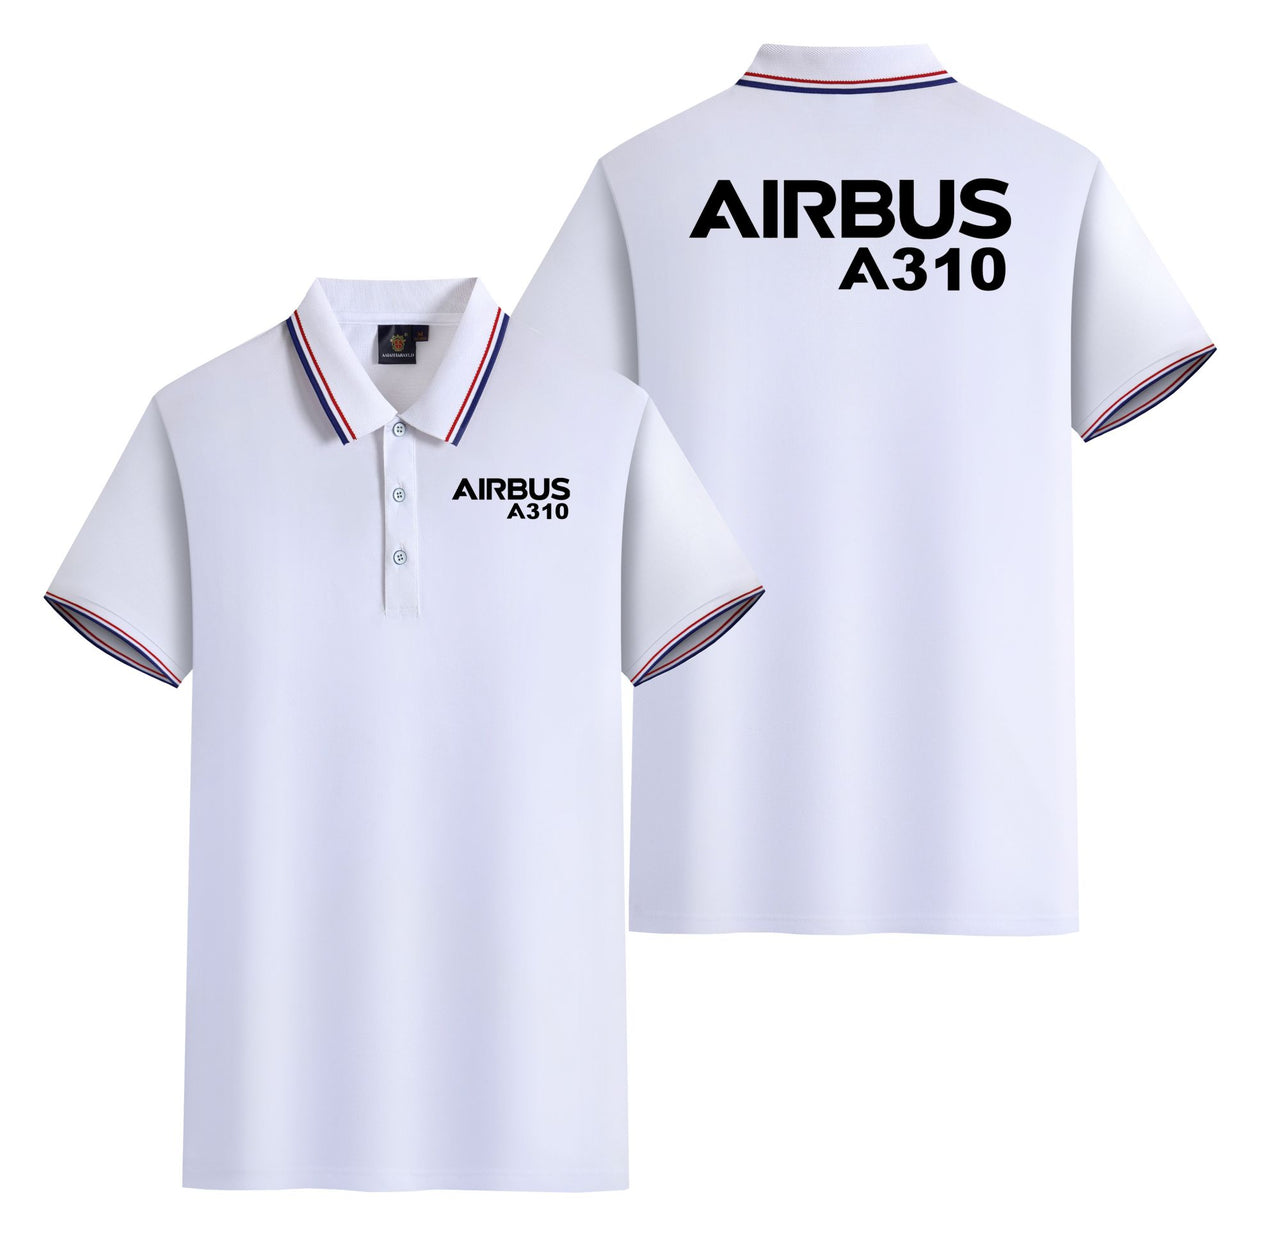 Airbus A310 & Text Designed Stylish Polo T-Shirts (Double-Side)